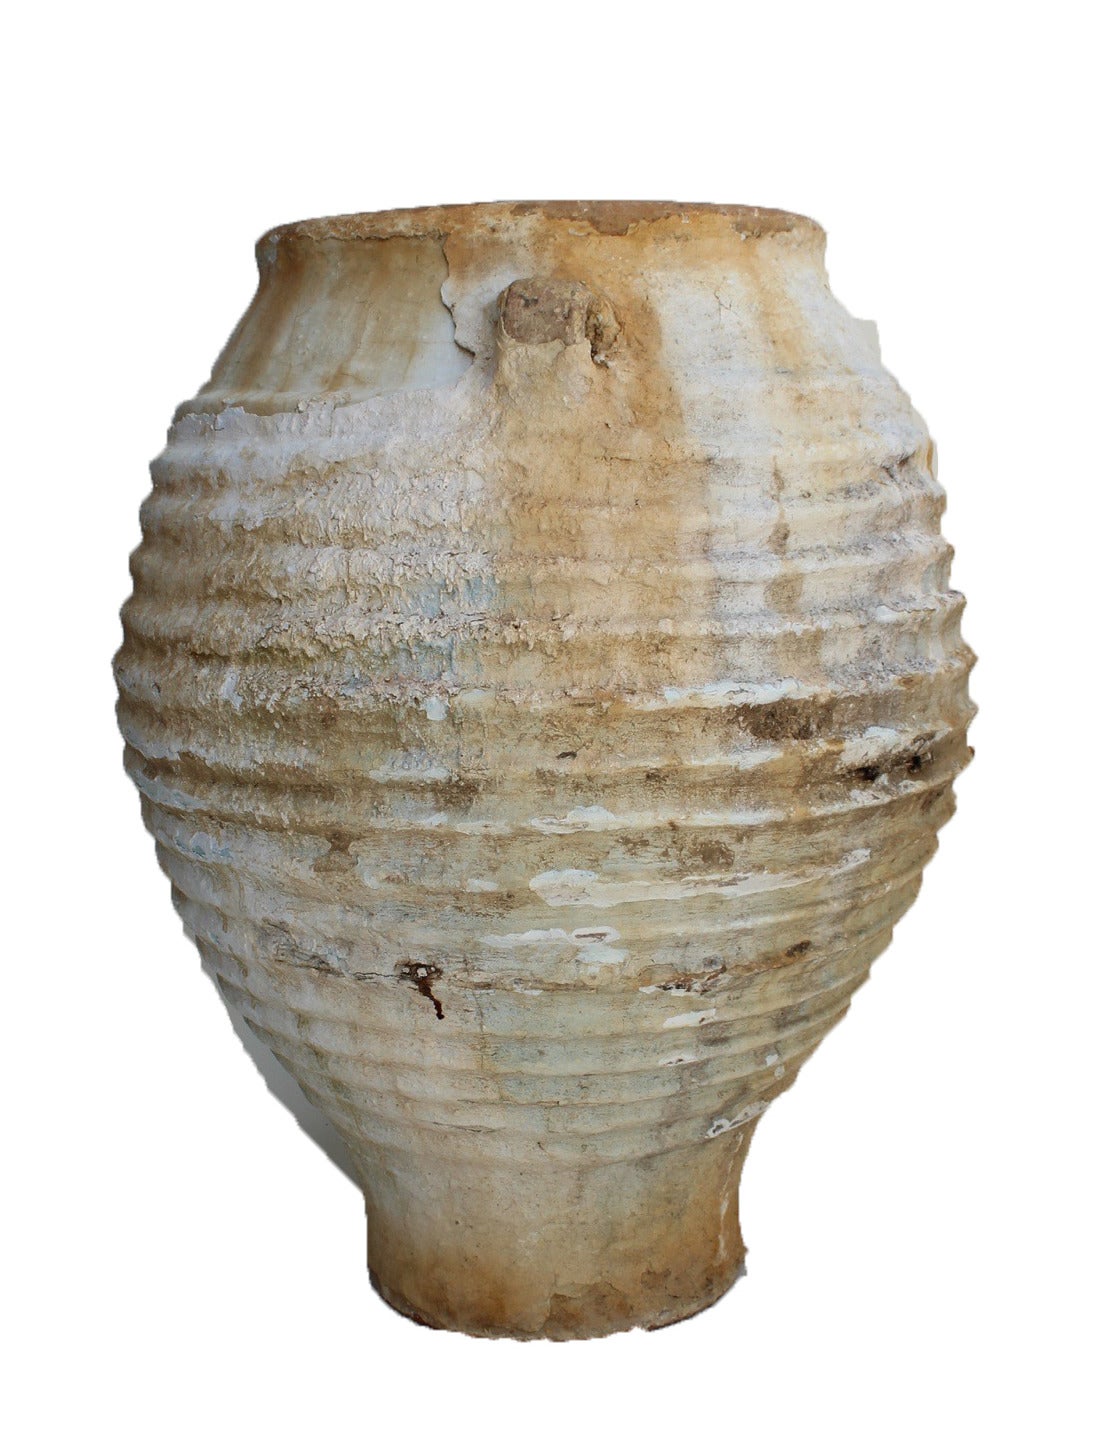 Large beautiful 19th century terracotta olive jars with antiqued white paint from Mediterranean area. We have many to select from in a range of sizes, shapes and colors.
Large olive jars provide a wonderful architectural feature to outdoor gardens